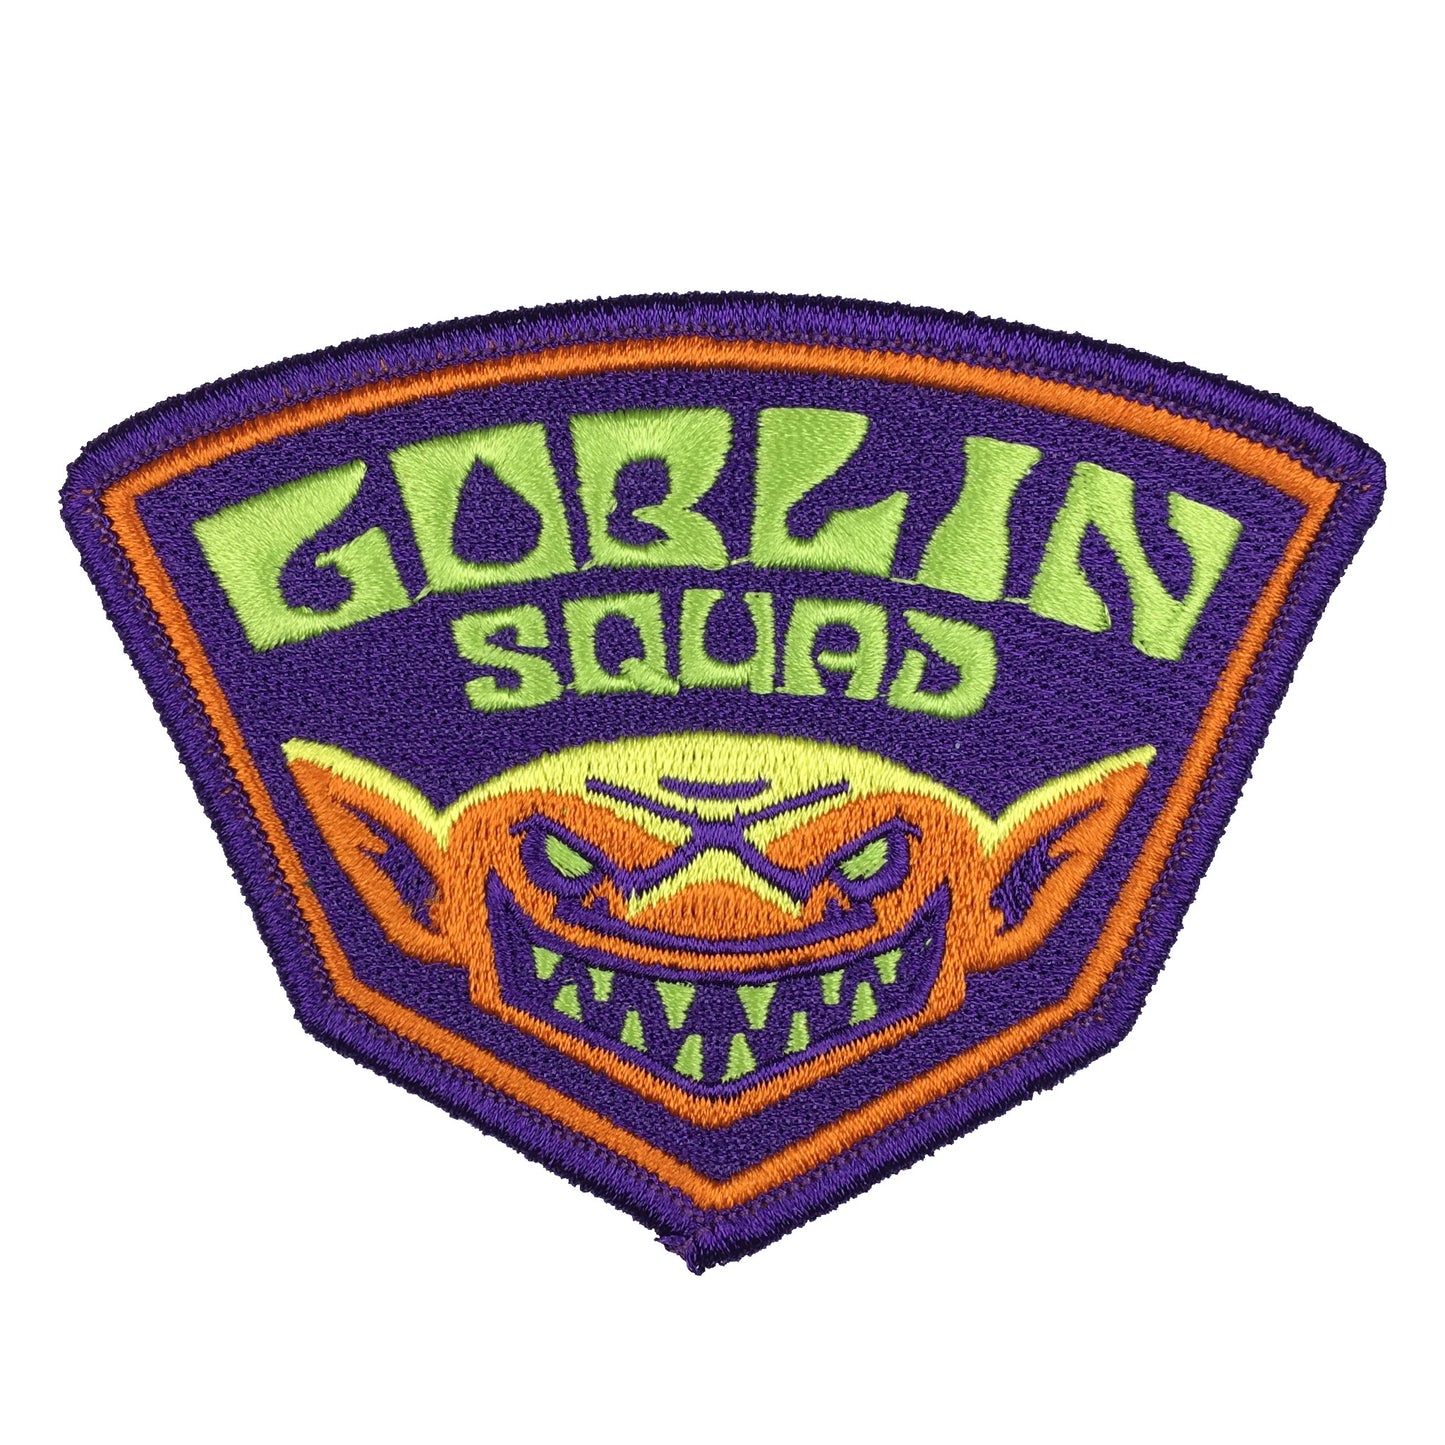 Goblin Squad folklore mythology creature embroidered patch 